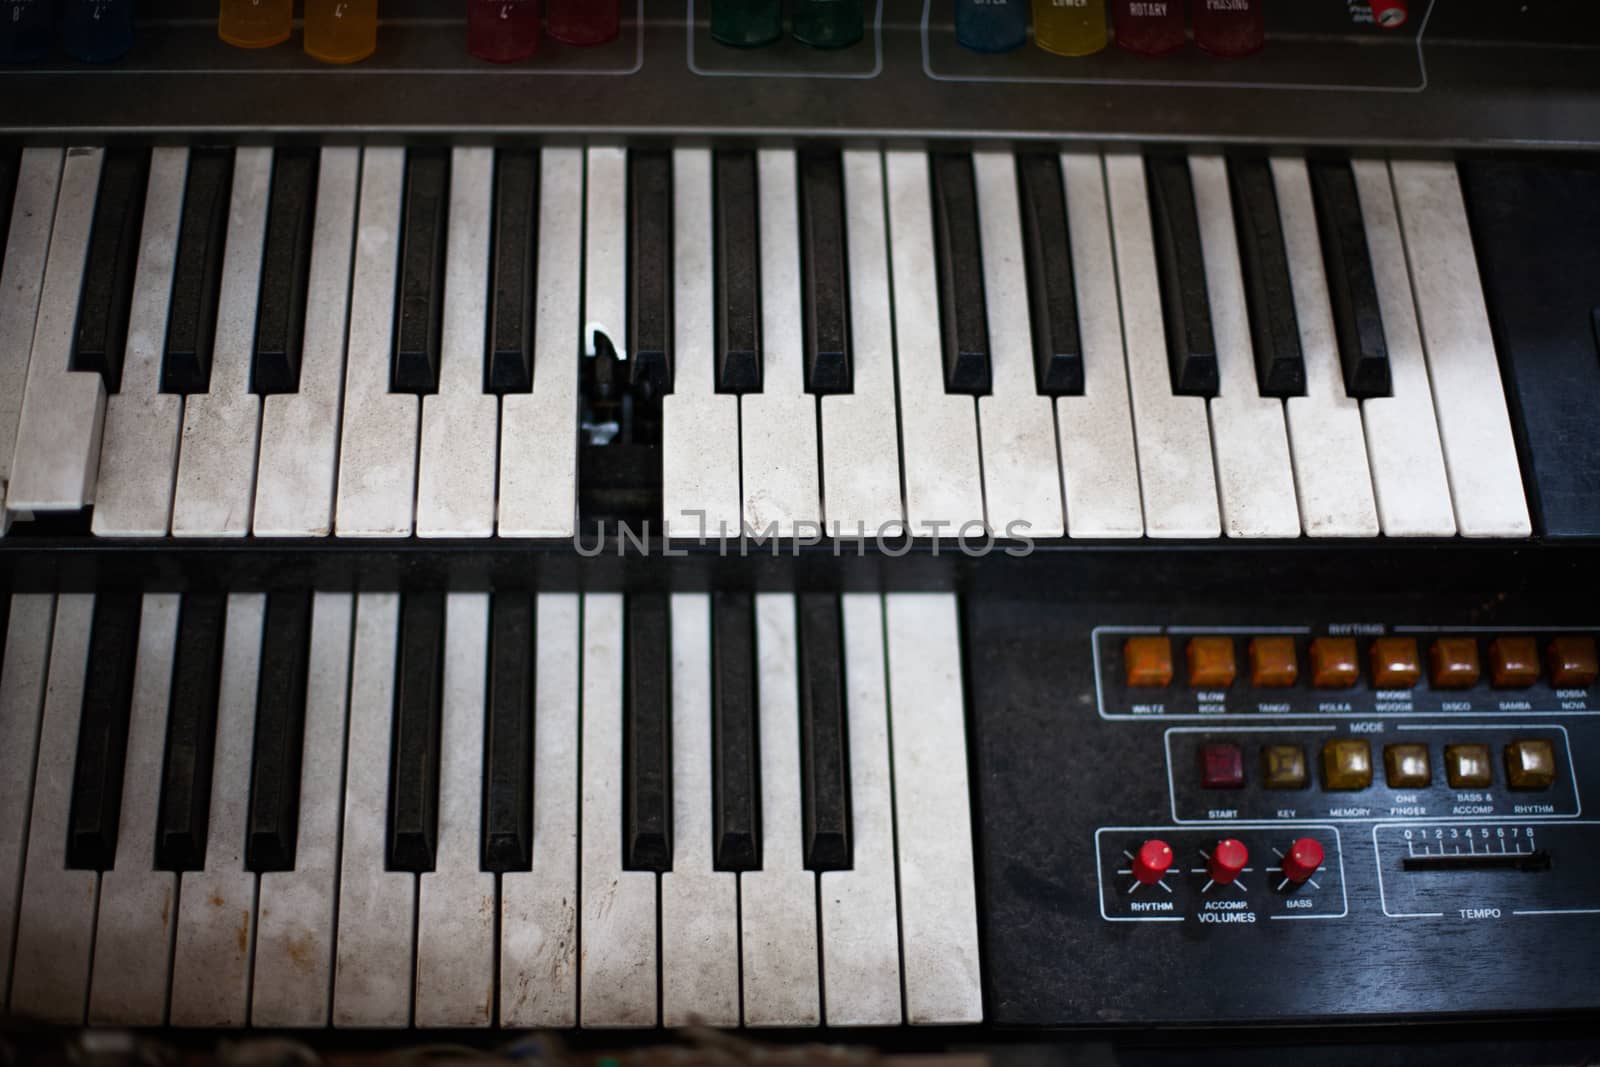 Old retro unnecessary faulty musical synthesizer by Softulka